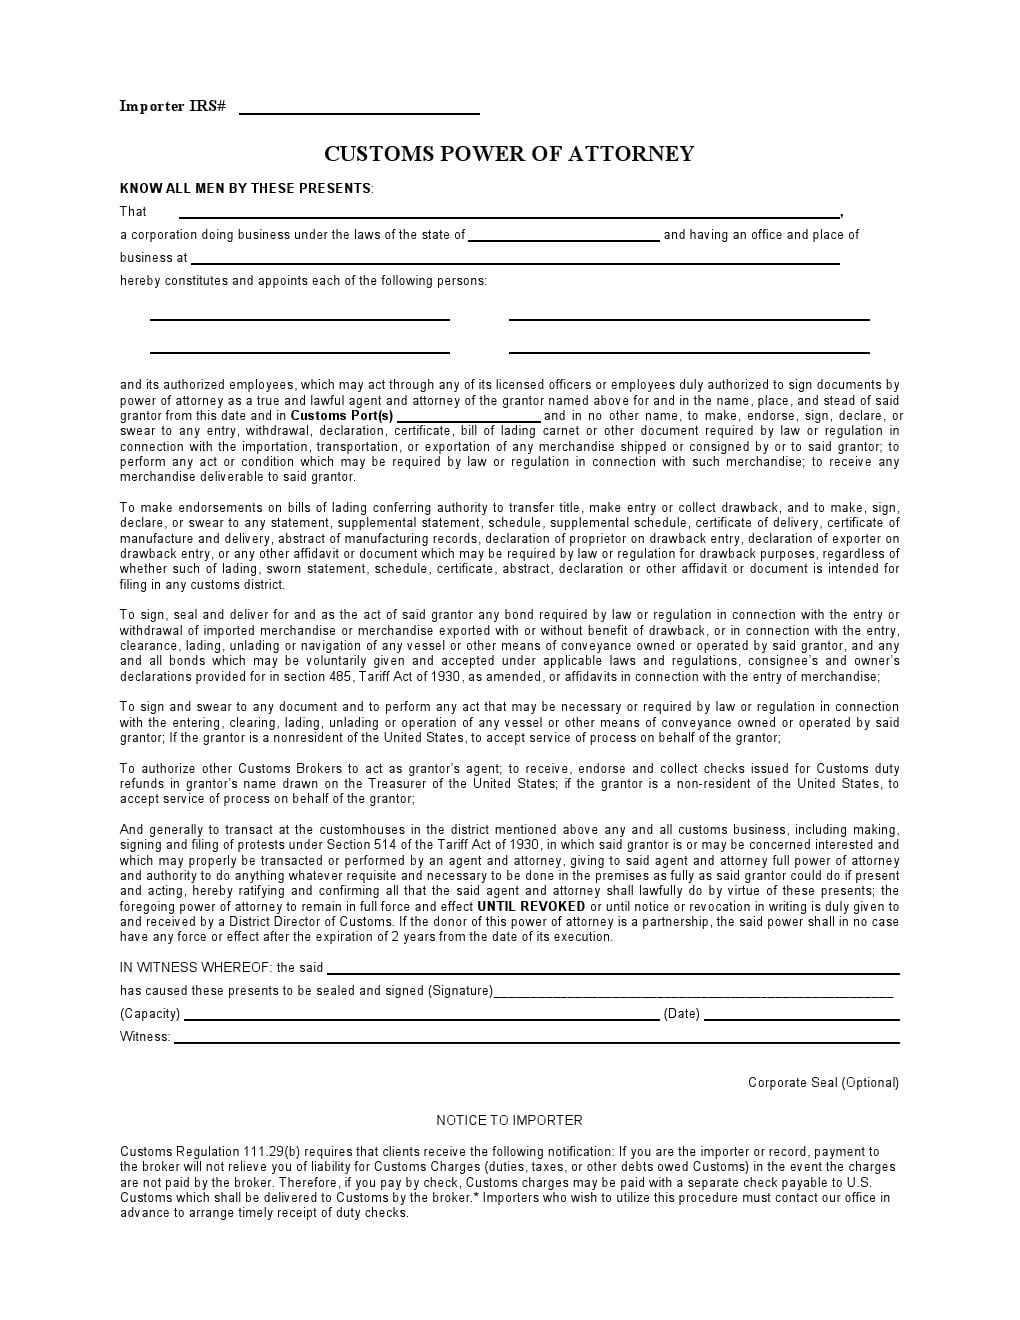 Free Customs Power Of Attorney Form